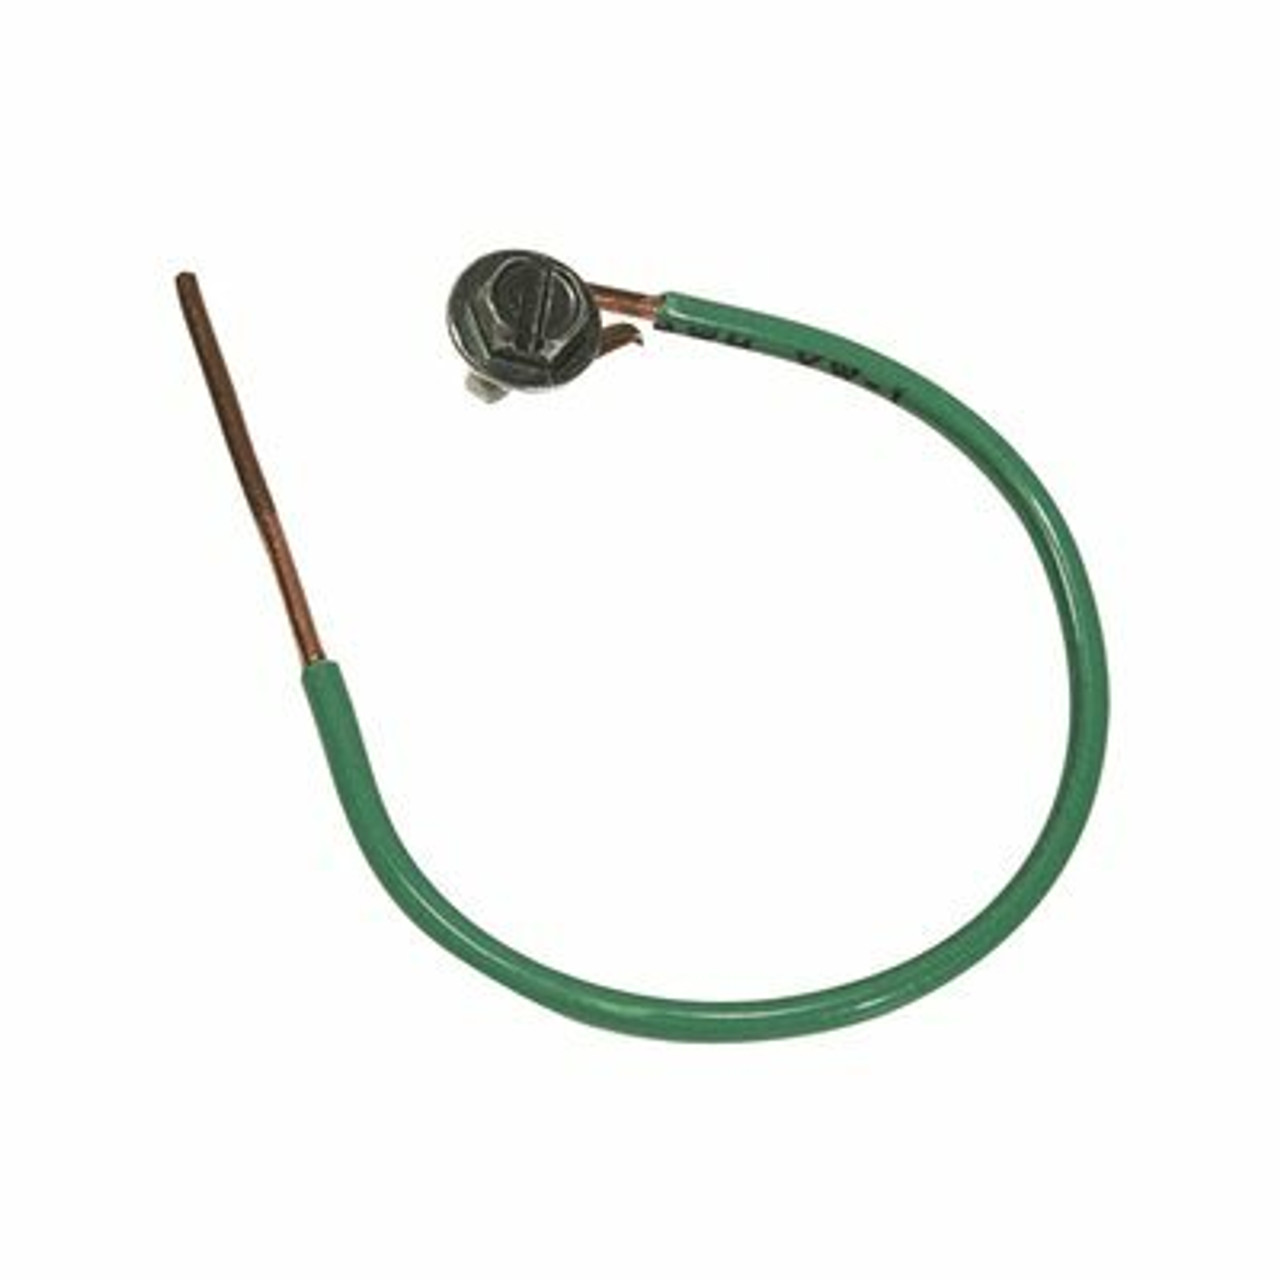 Thomas & Betts 12 Awg Solid Grounding Pigtail With Screw, Green